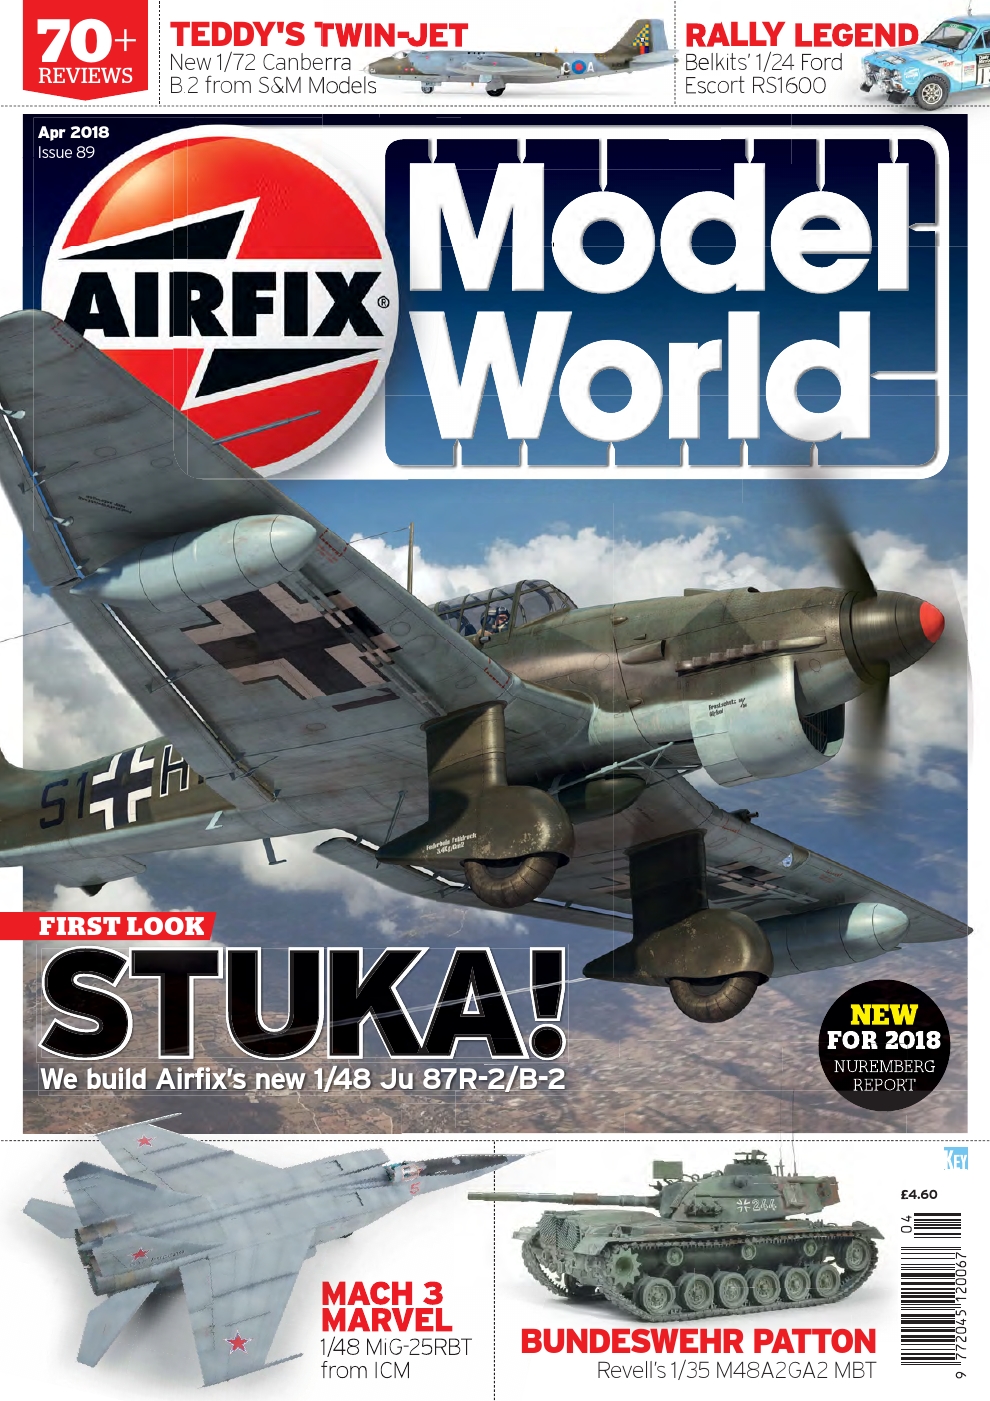 Airfix Model World Issue 89 April 2018